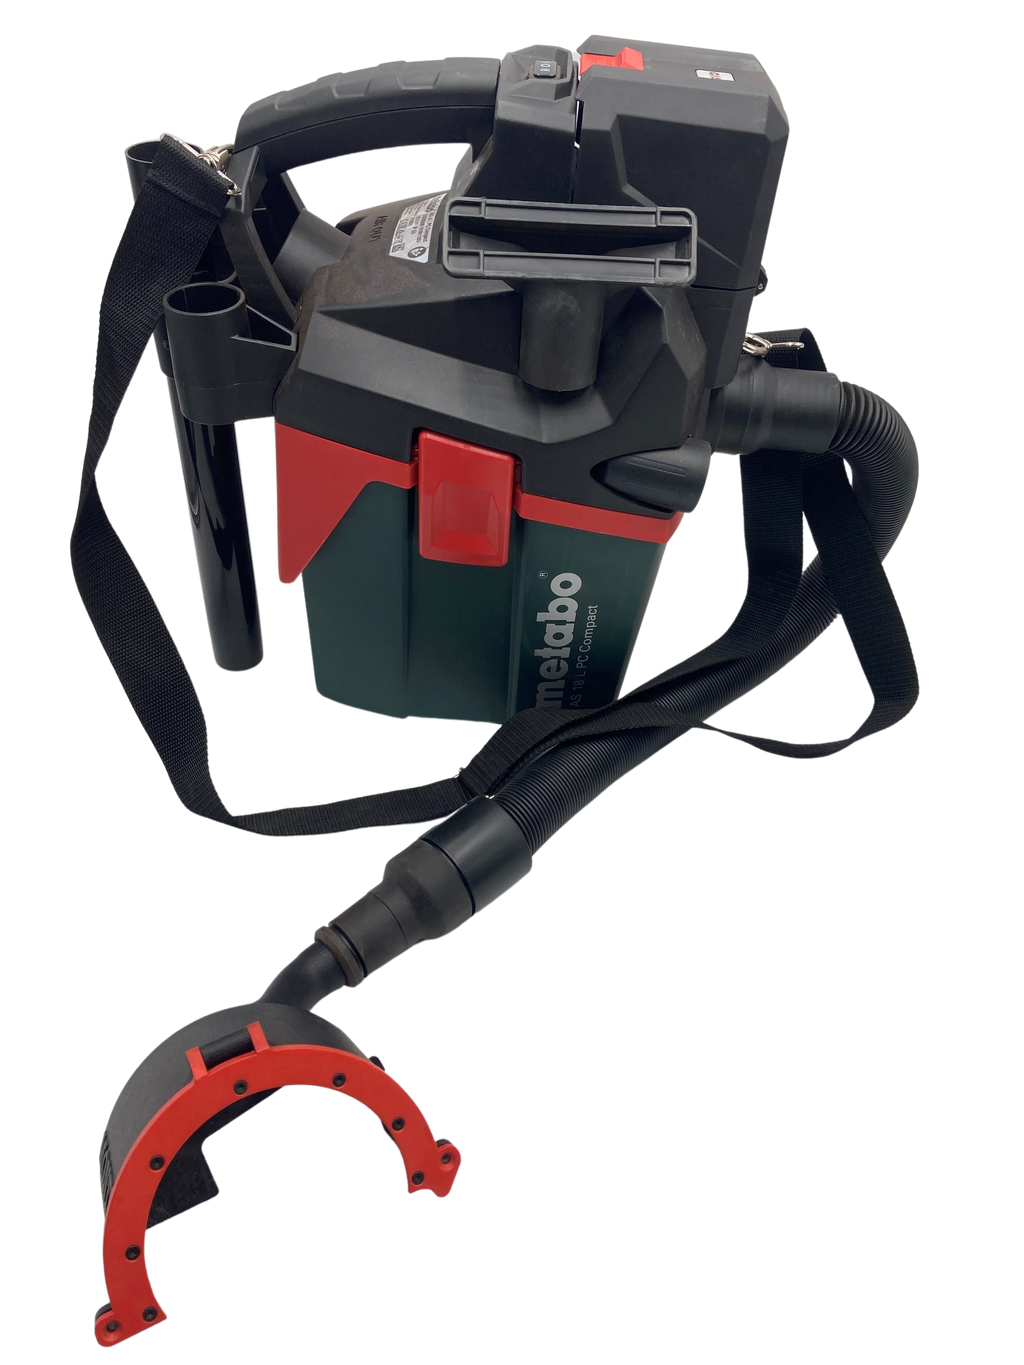 Metabo AS 18 COMPACT 602028850 dustcontrol without accu